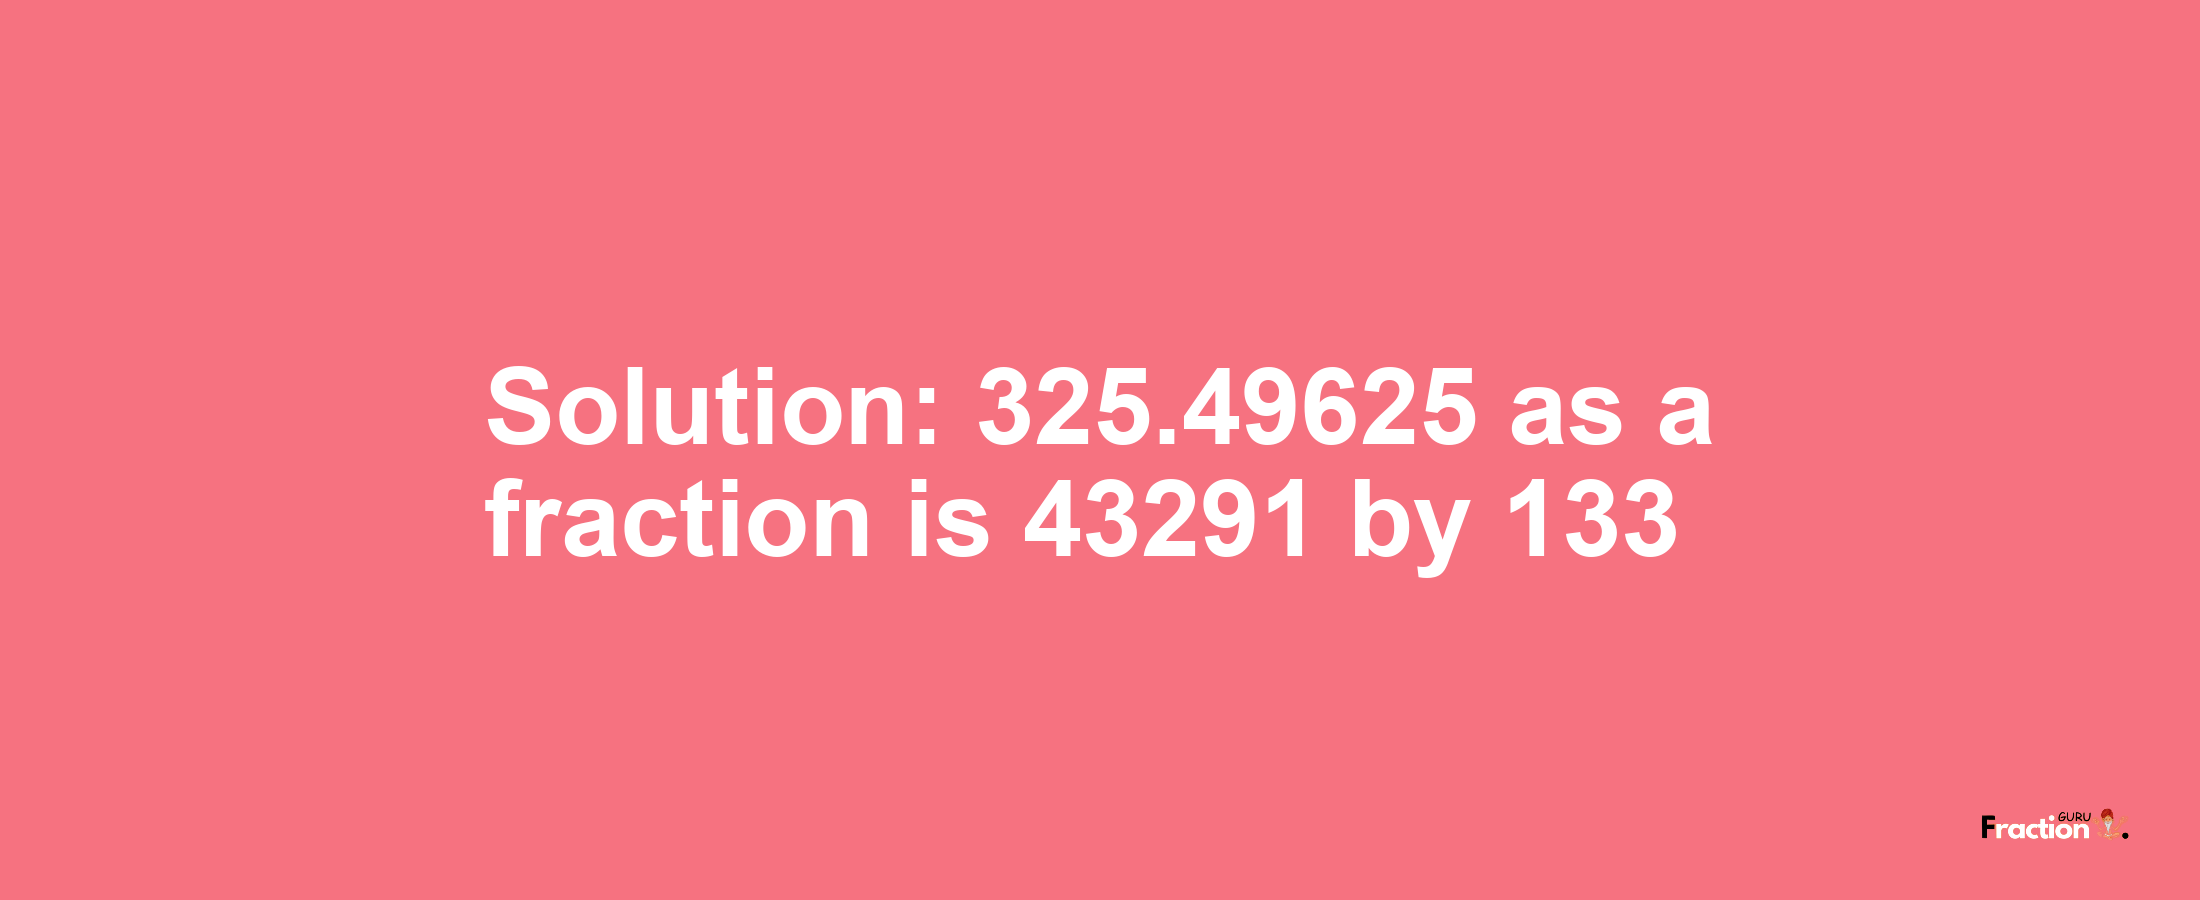 Solution:325.49625 as a fraction is 43291/133